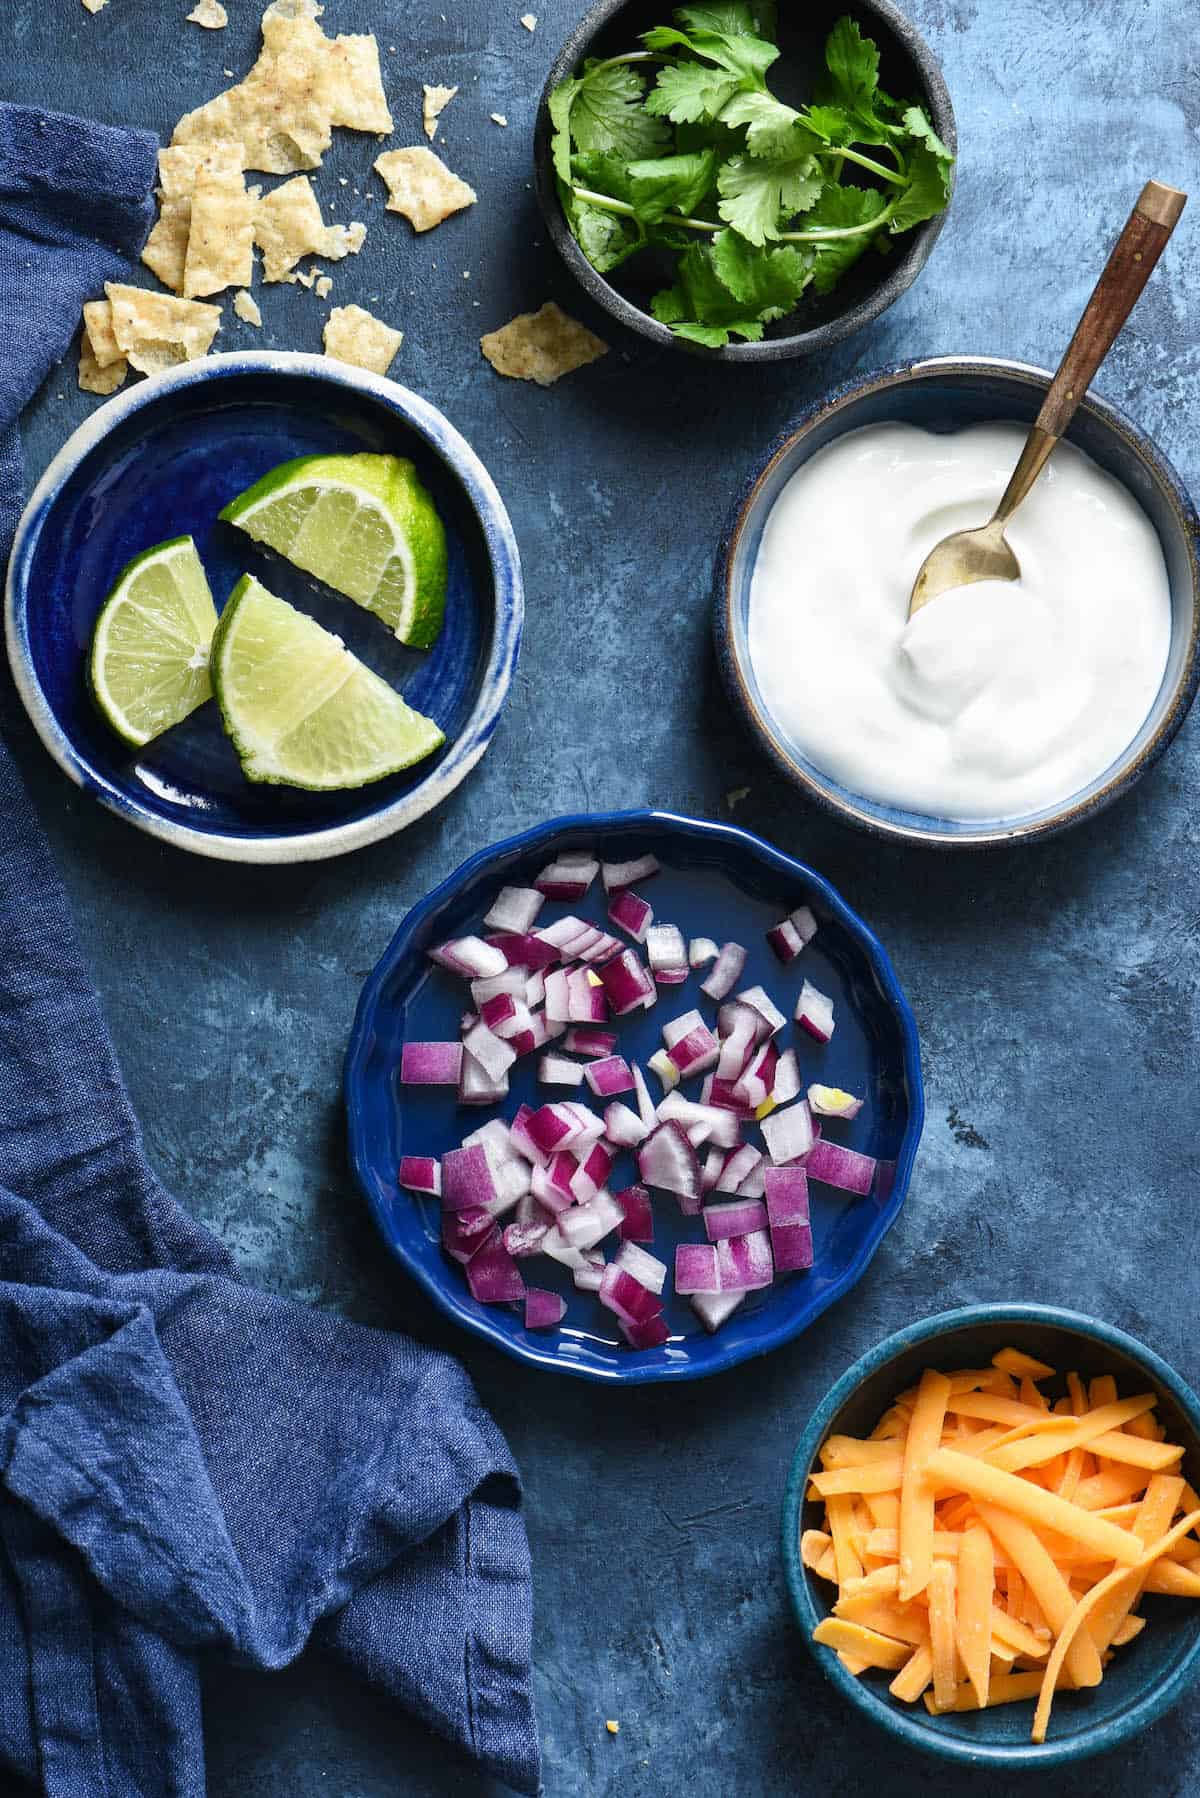 Bowls on blue background filled with garnished for taco soup, including cilantro, limes, sour cream, red onion and shredded cheese.